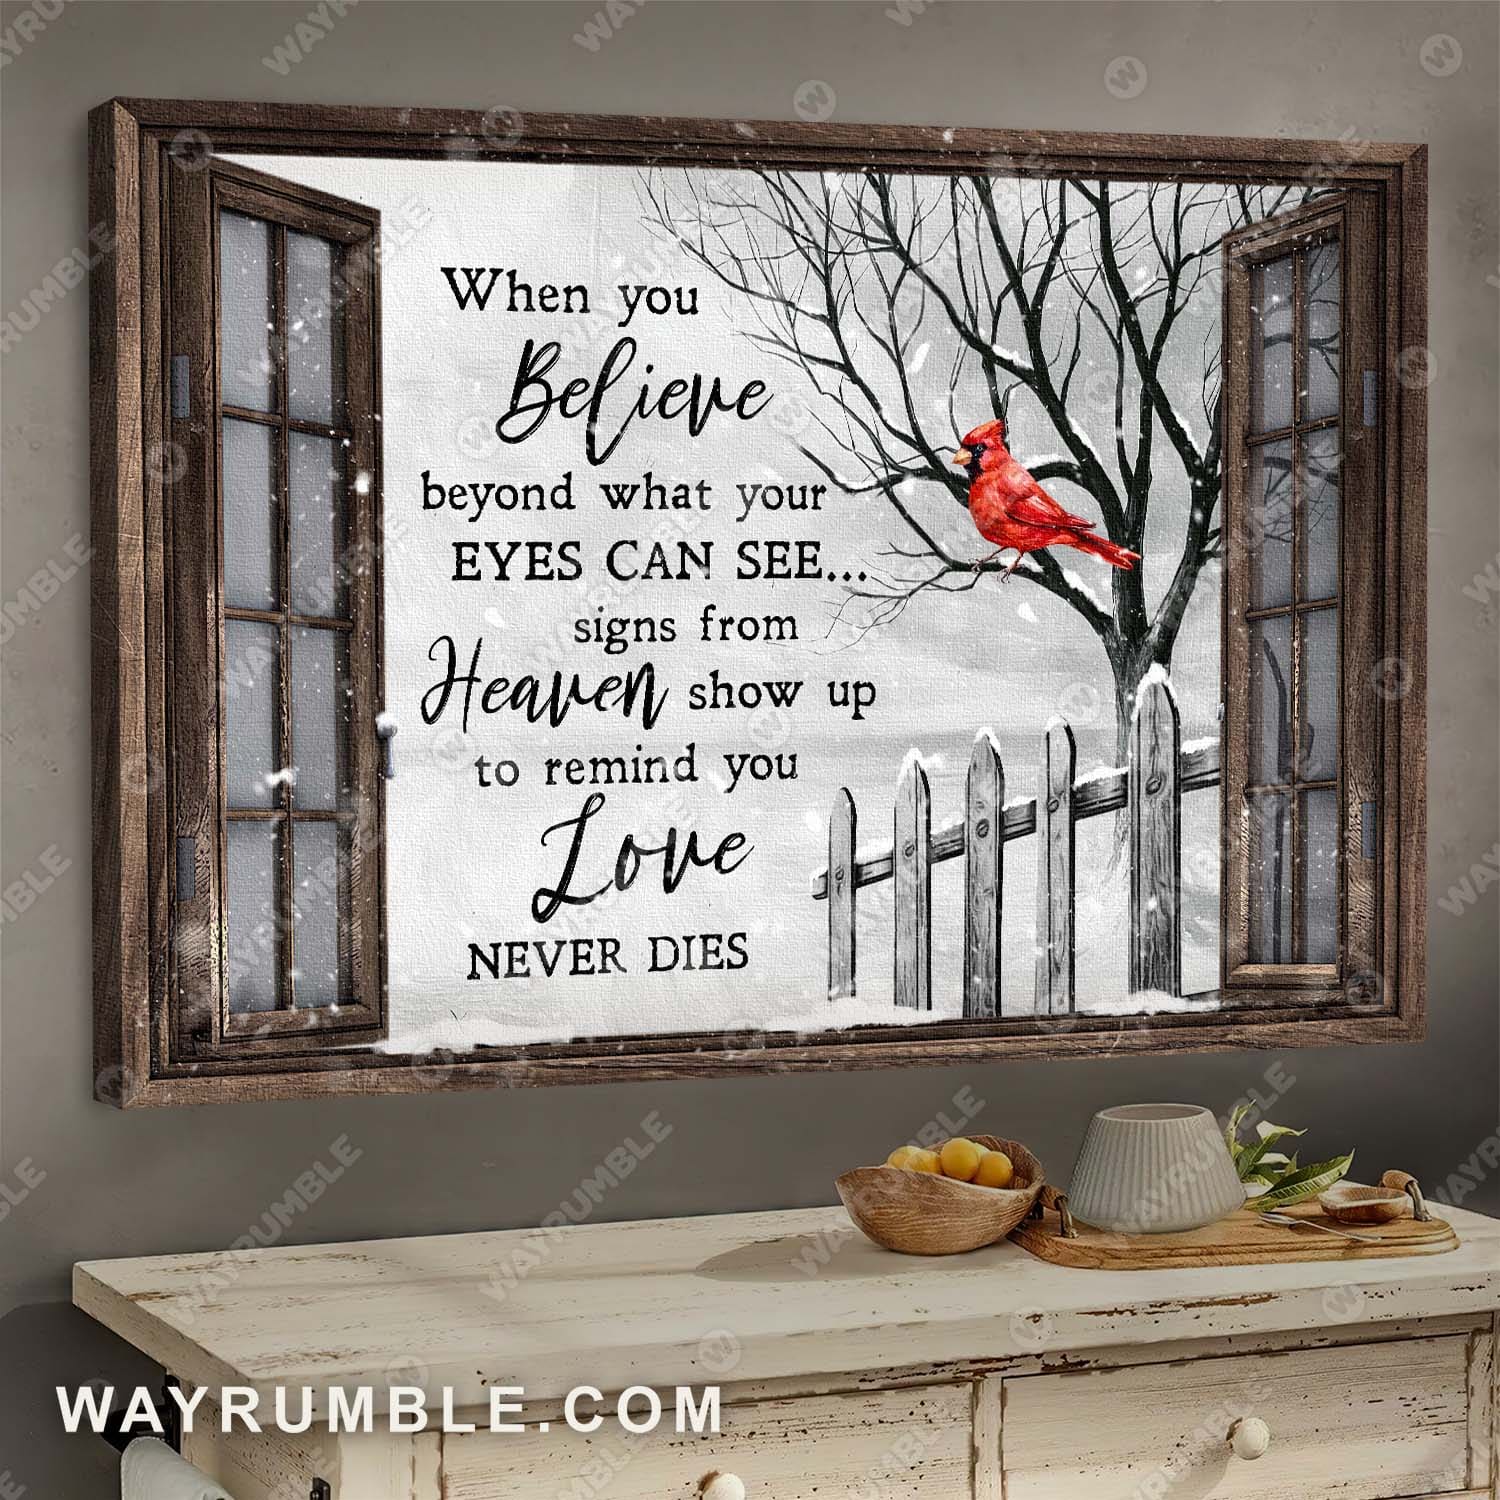 Cardinal, Winter tree, Window frame, When you believe, signs from heaven show up to remind you love never dies - Jesus Landscape Canvas Prints, Wall Art